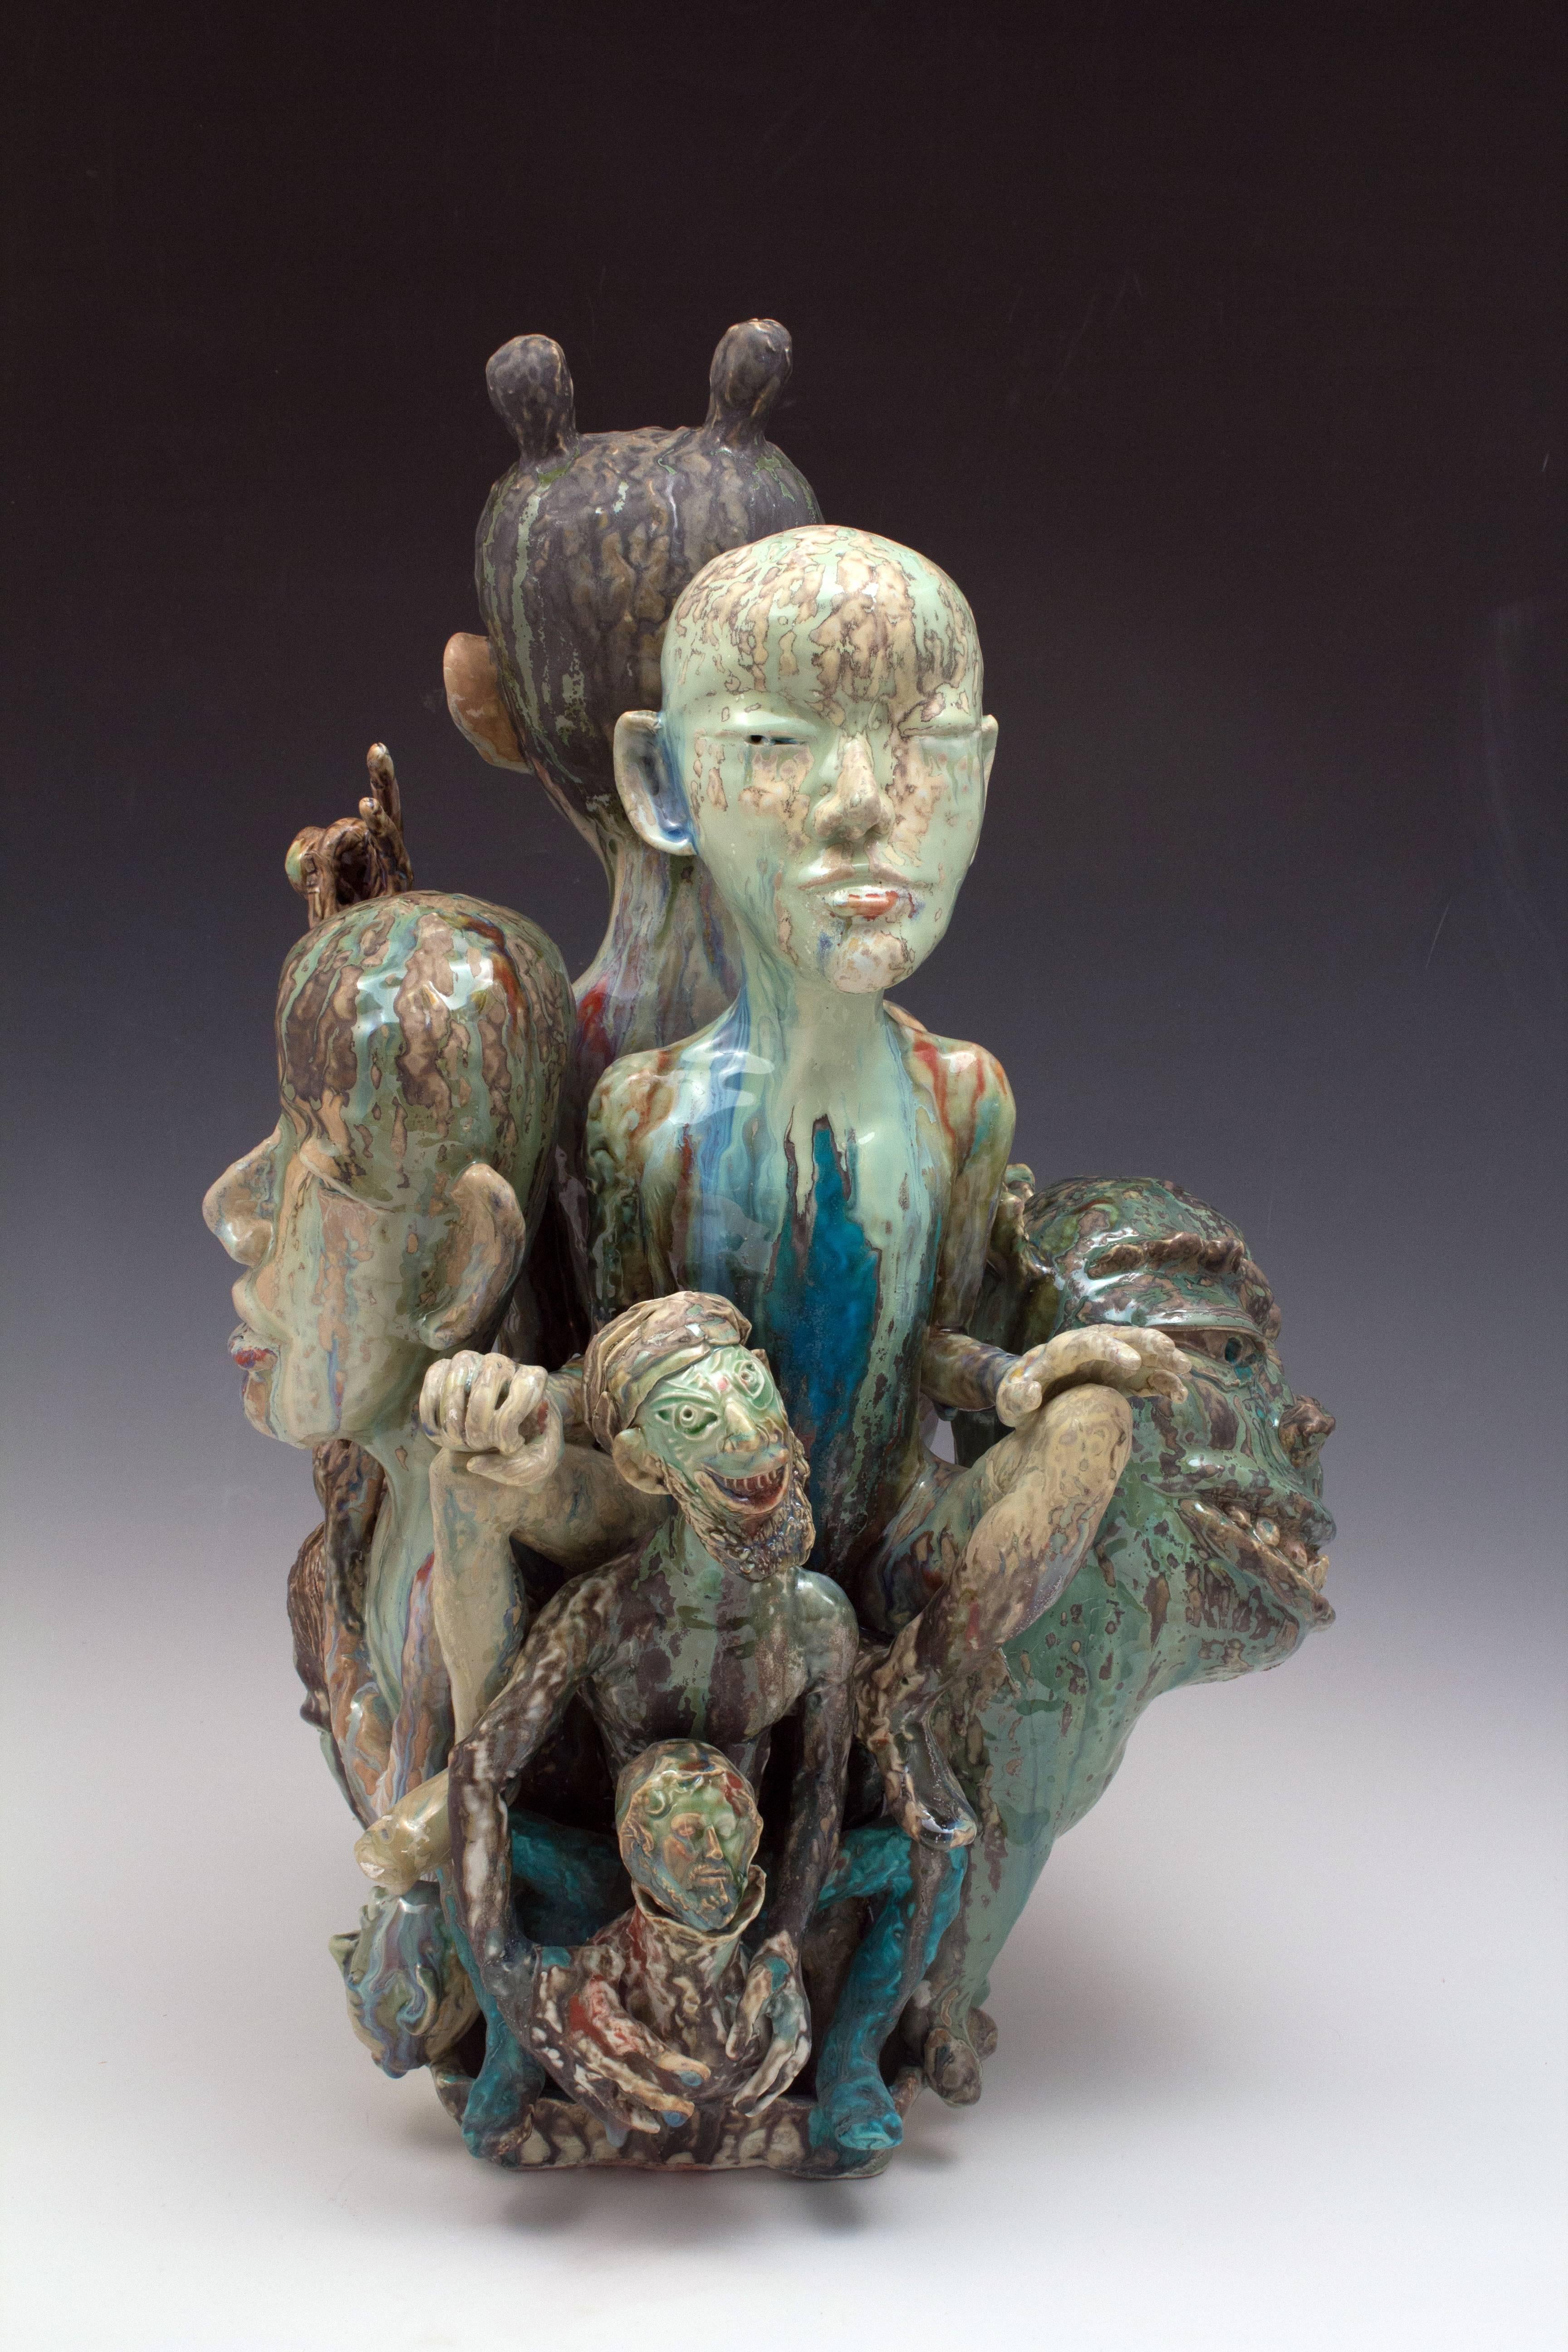 SunKoo Yuh Abstract Sculpture - "Be My Guest", Figurative Porcelain Sculpture, Dynamic Composition, Glaze